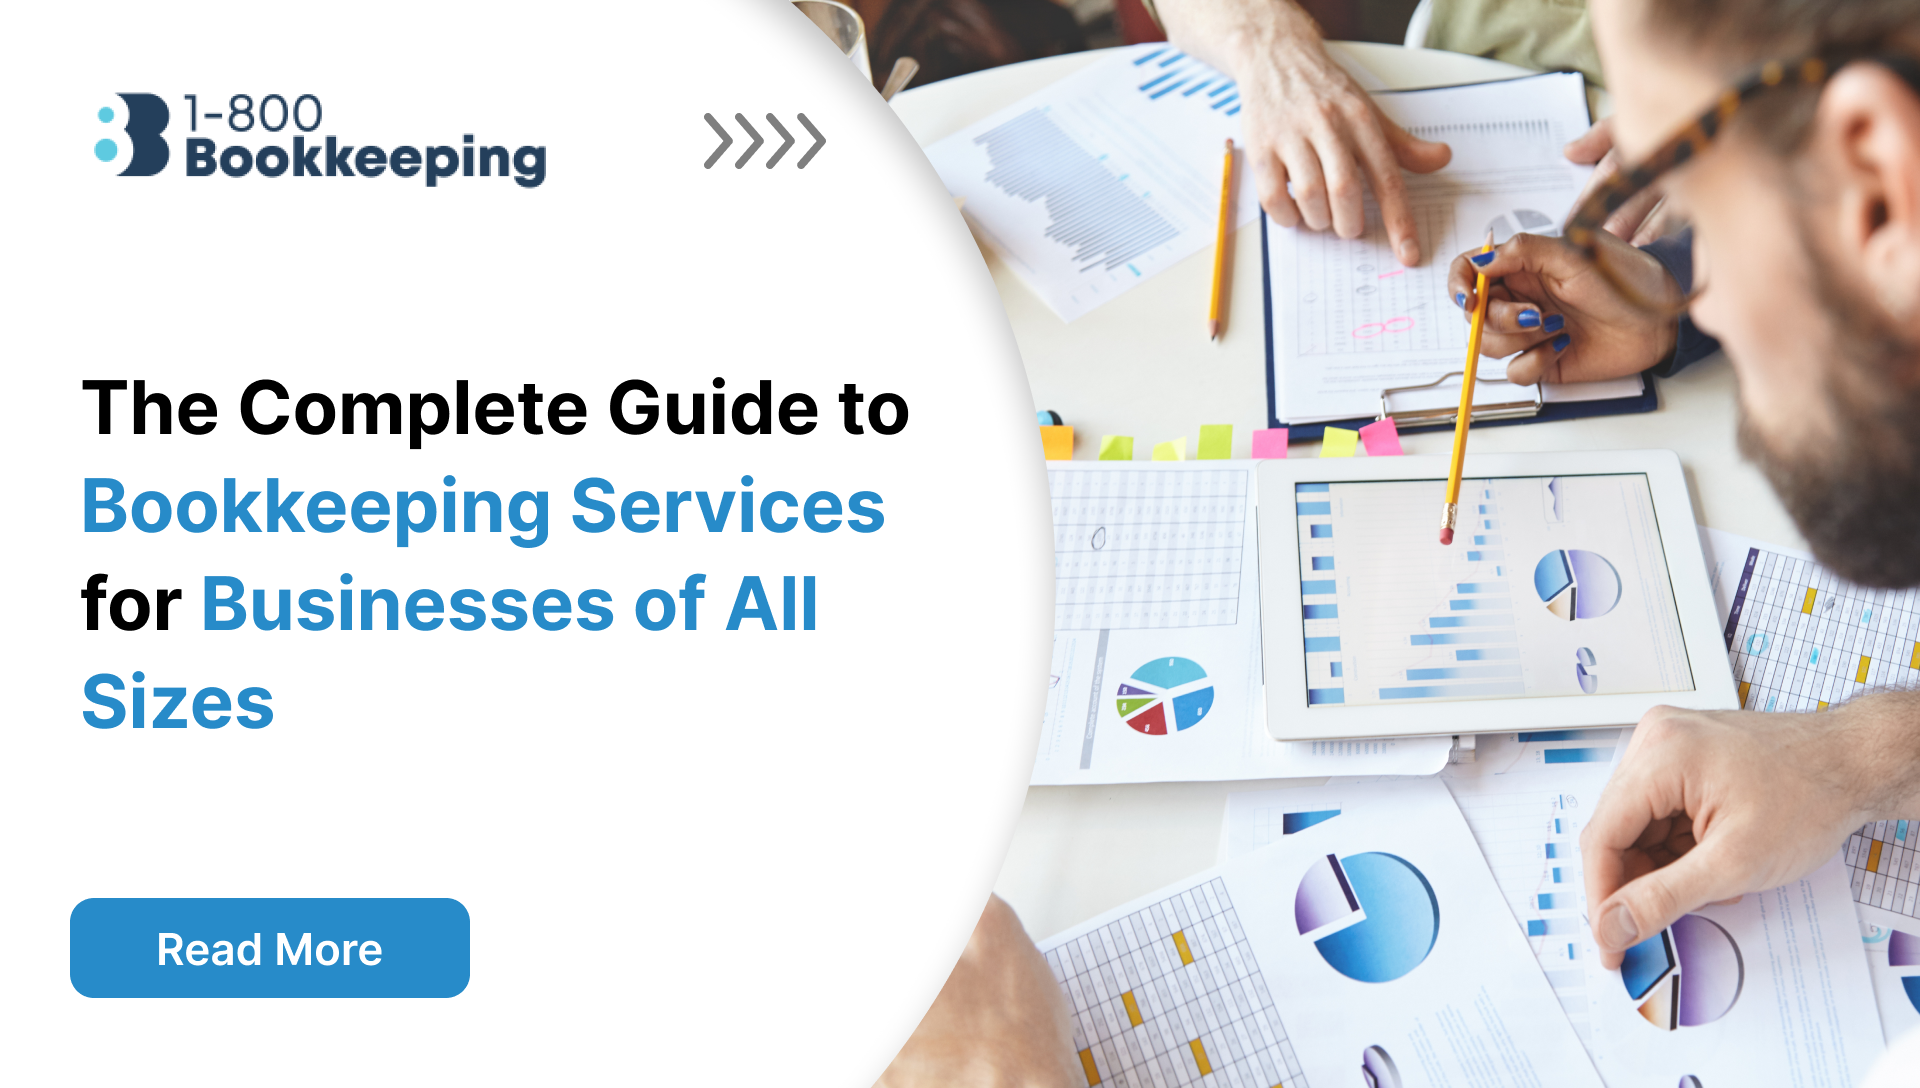 The Complete Guide to Bookkeeping Services for Businesses of All Sizes